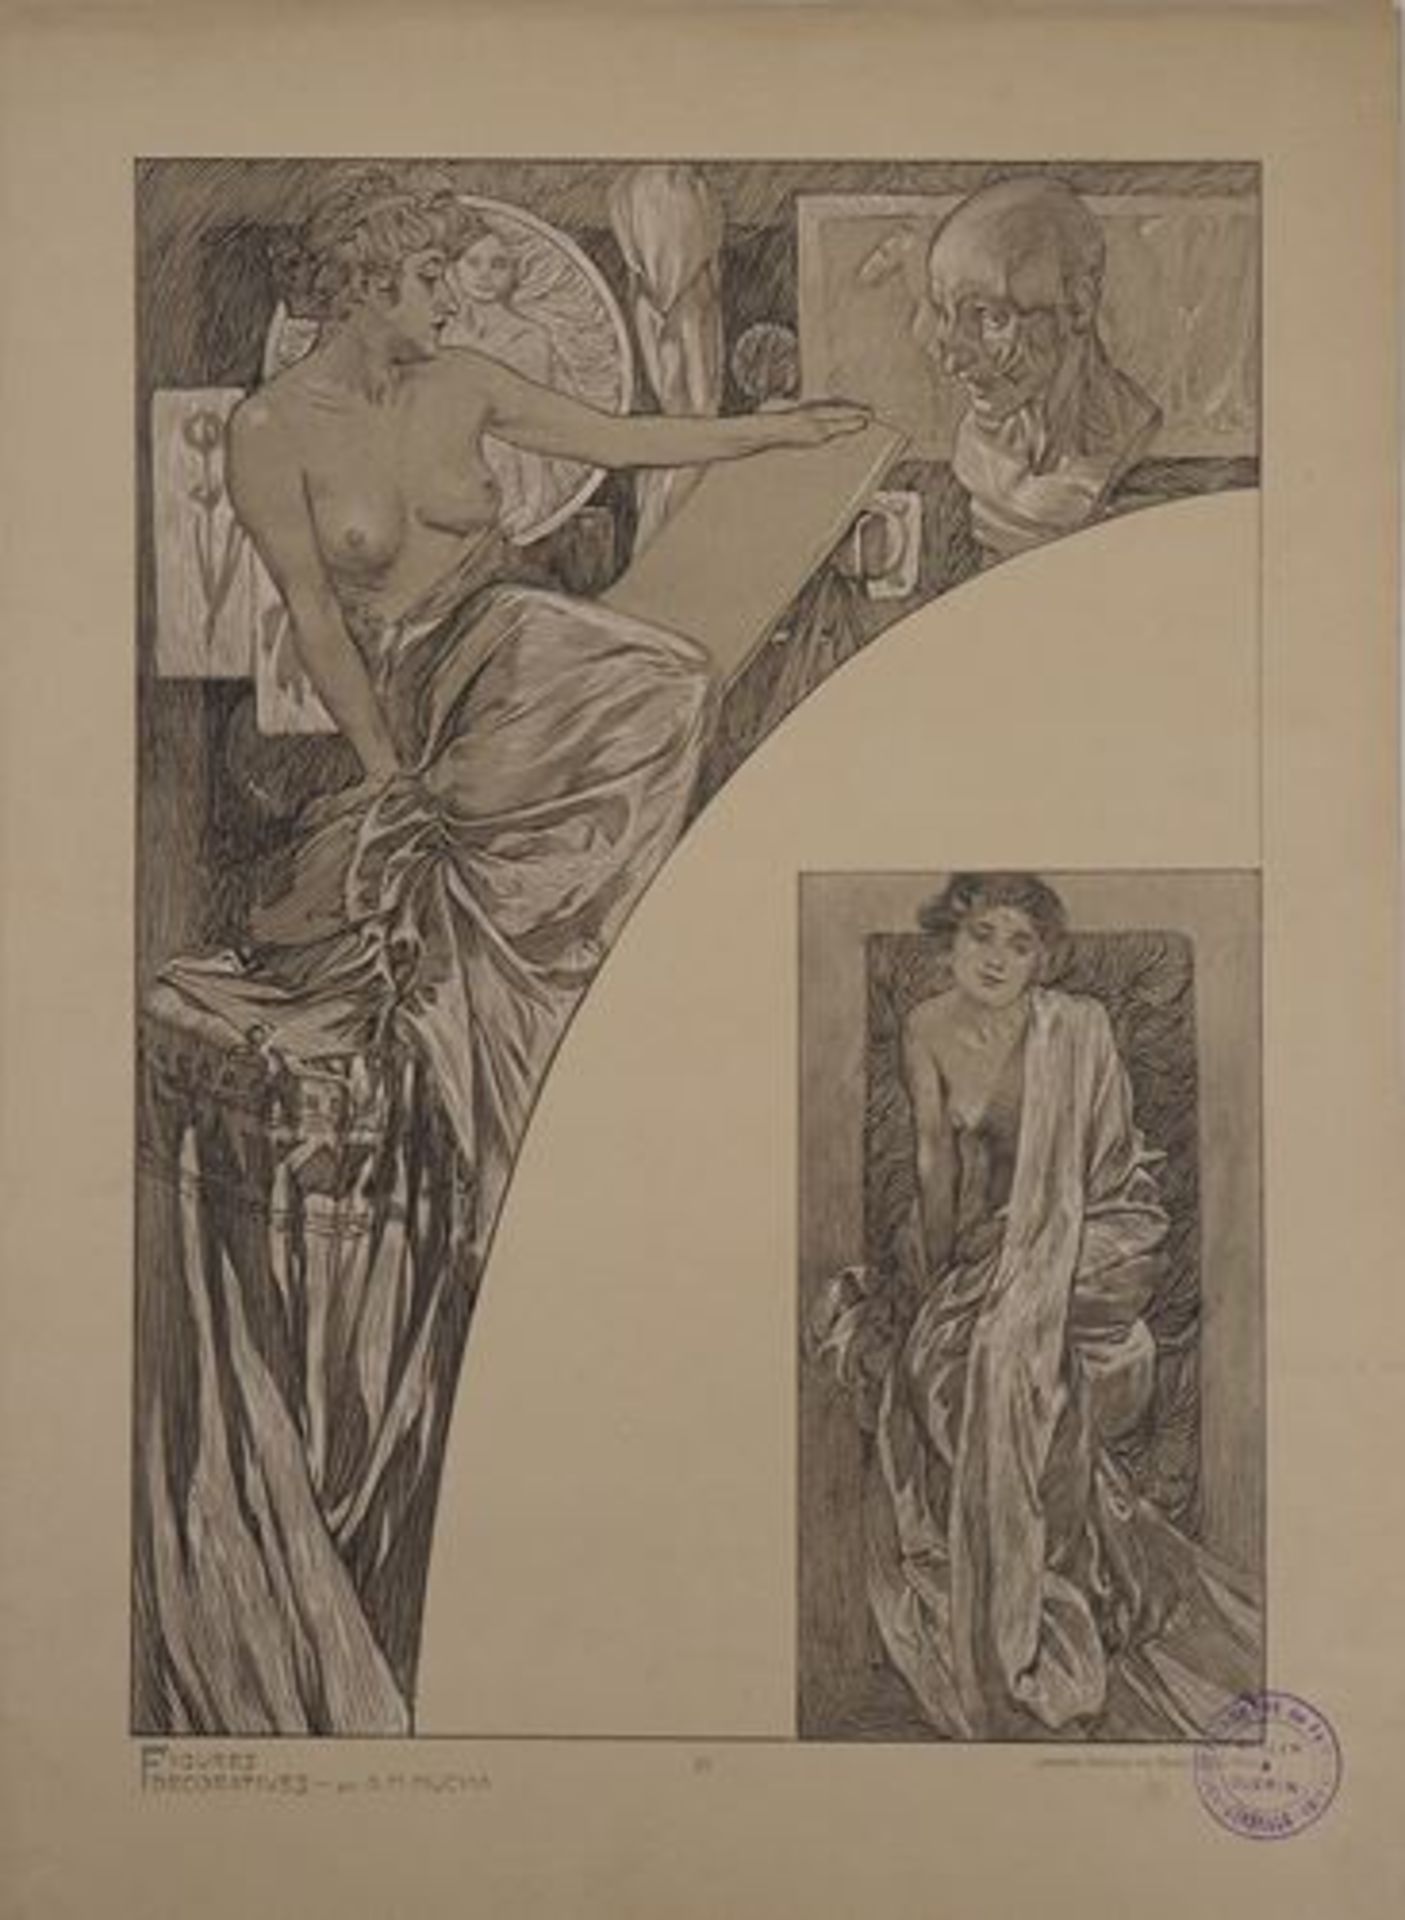 Alphonse MUCHA Model in the workshop, 1902 Lithograph Signed in the plate On thick [...]